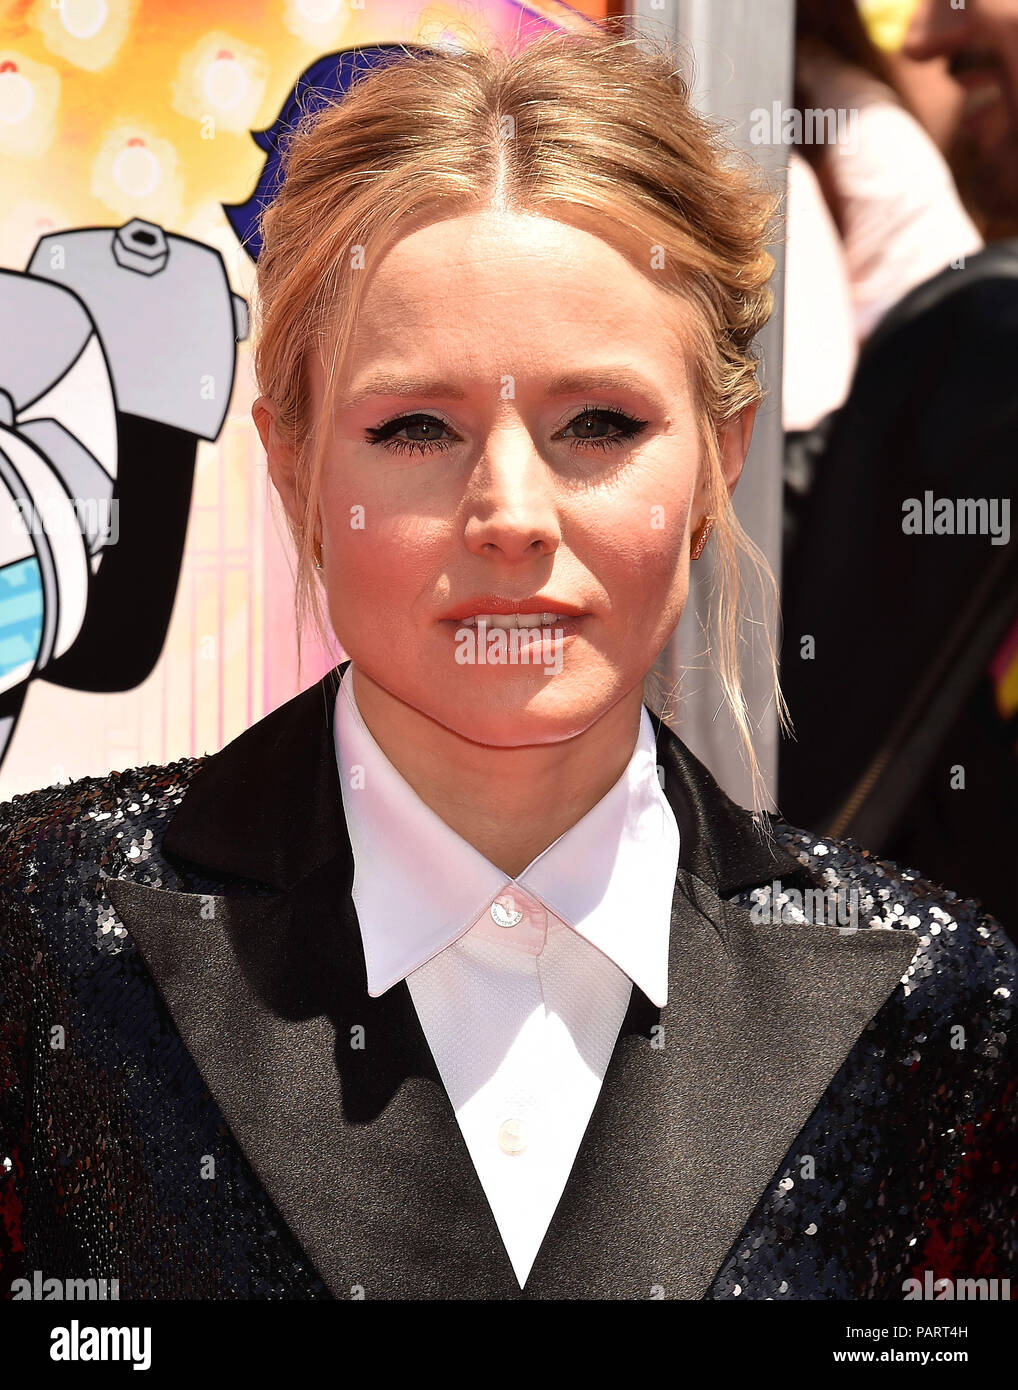 KRISTEN BELL American film actress  attends the premiere of Warner Bros. Animations' 'Teen Titans Go! To The Movies' TCL Chinese Theatre on July 22, 2018 in Hollywood, California. Photo: Jeffrey Mayer Stock Photo